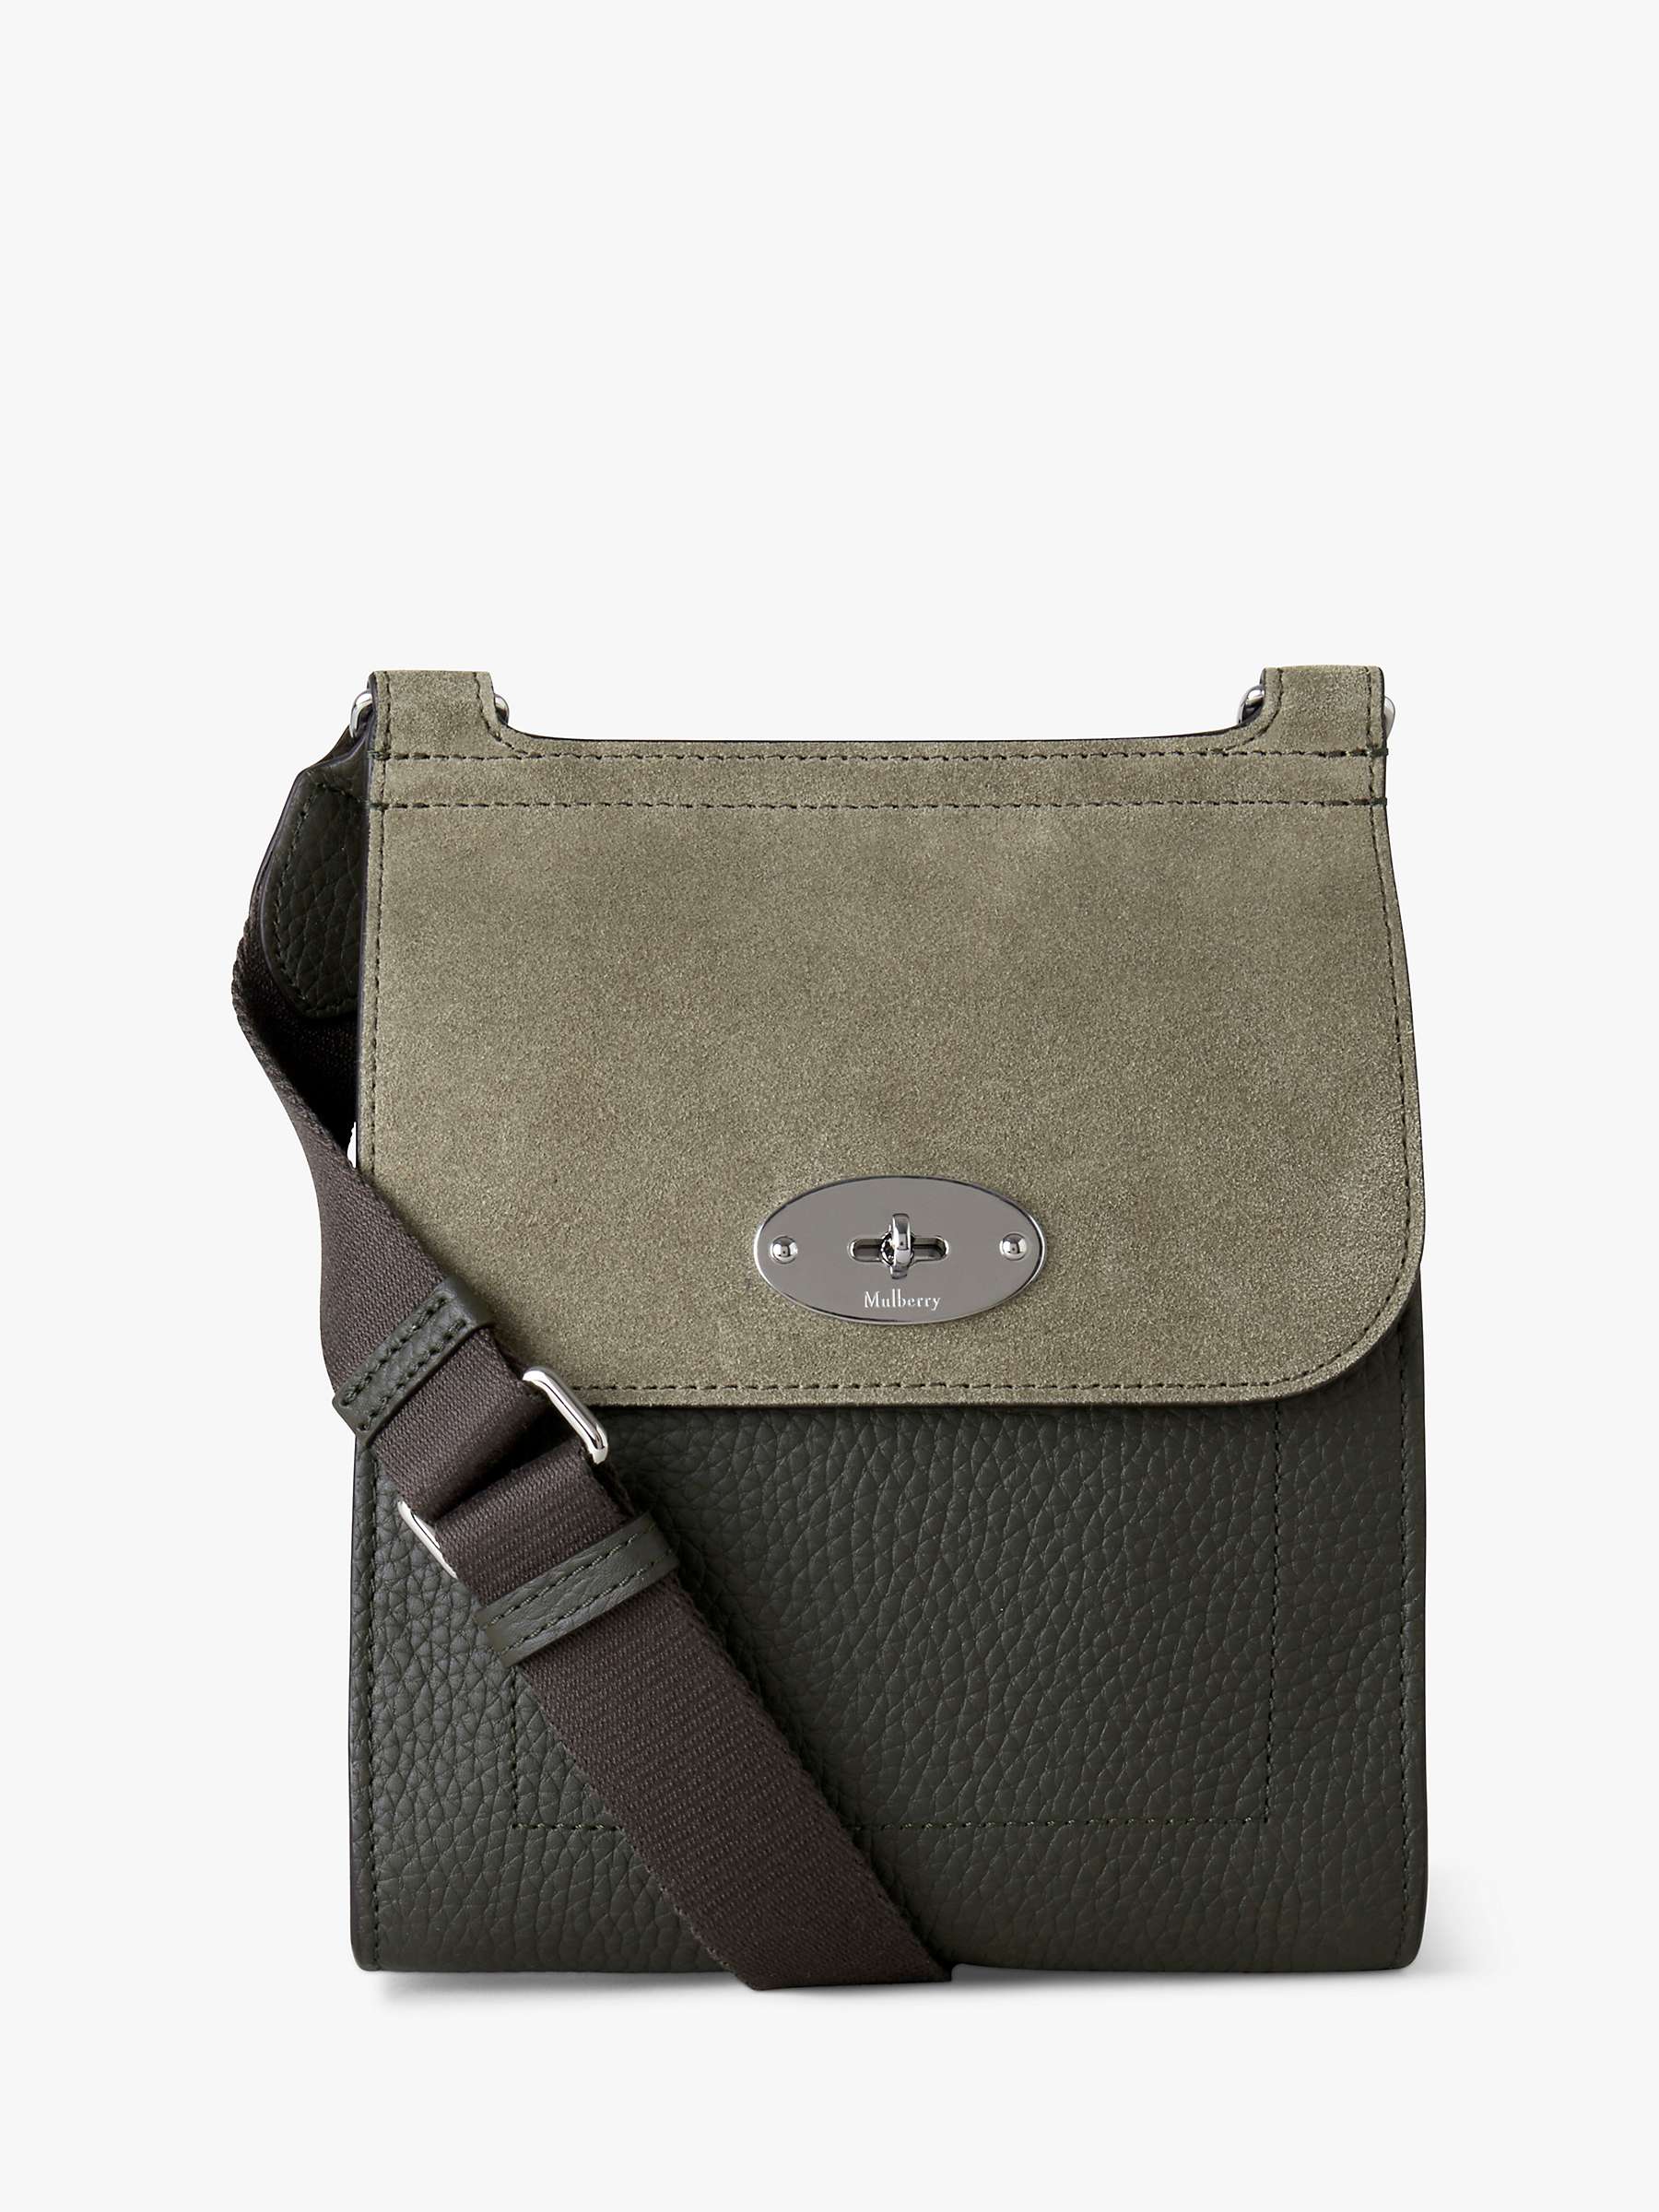 Buy Mulberry Small Antony Grained Leather/Suede Messenger Bag, Dark Green/Olive Online at johnlewis.com